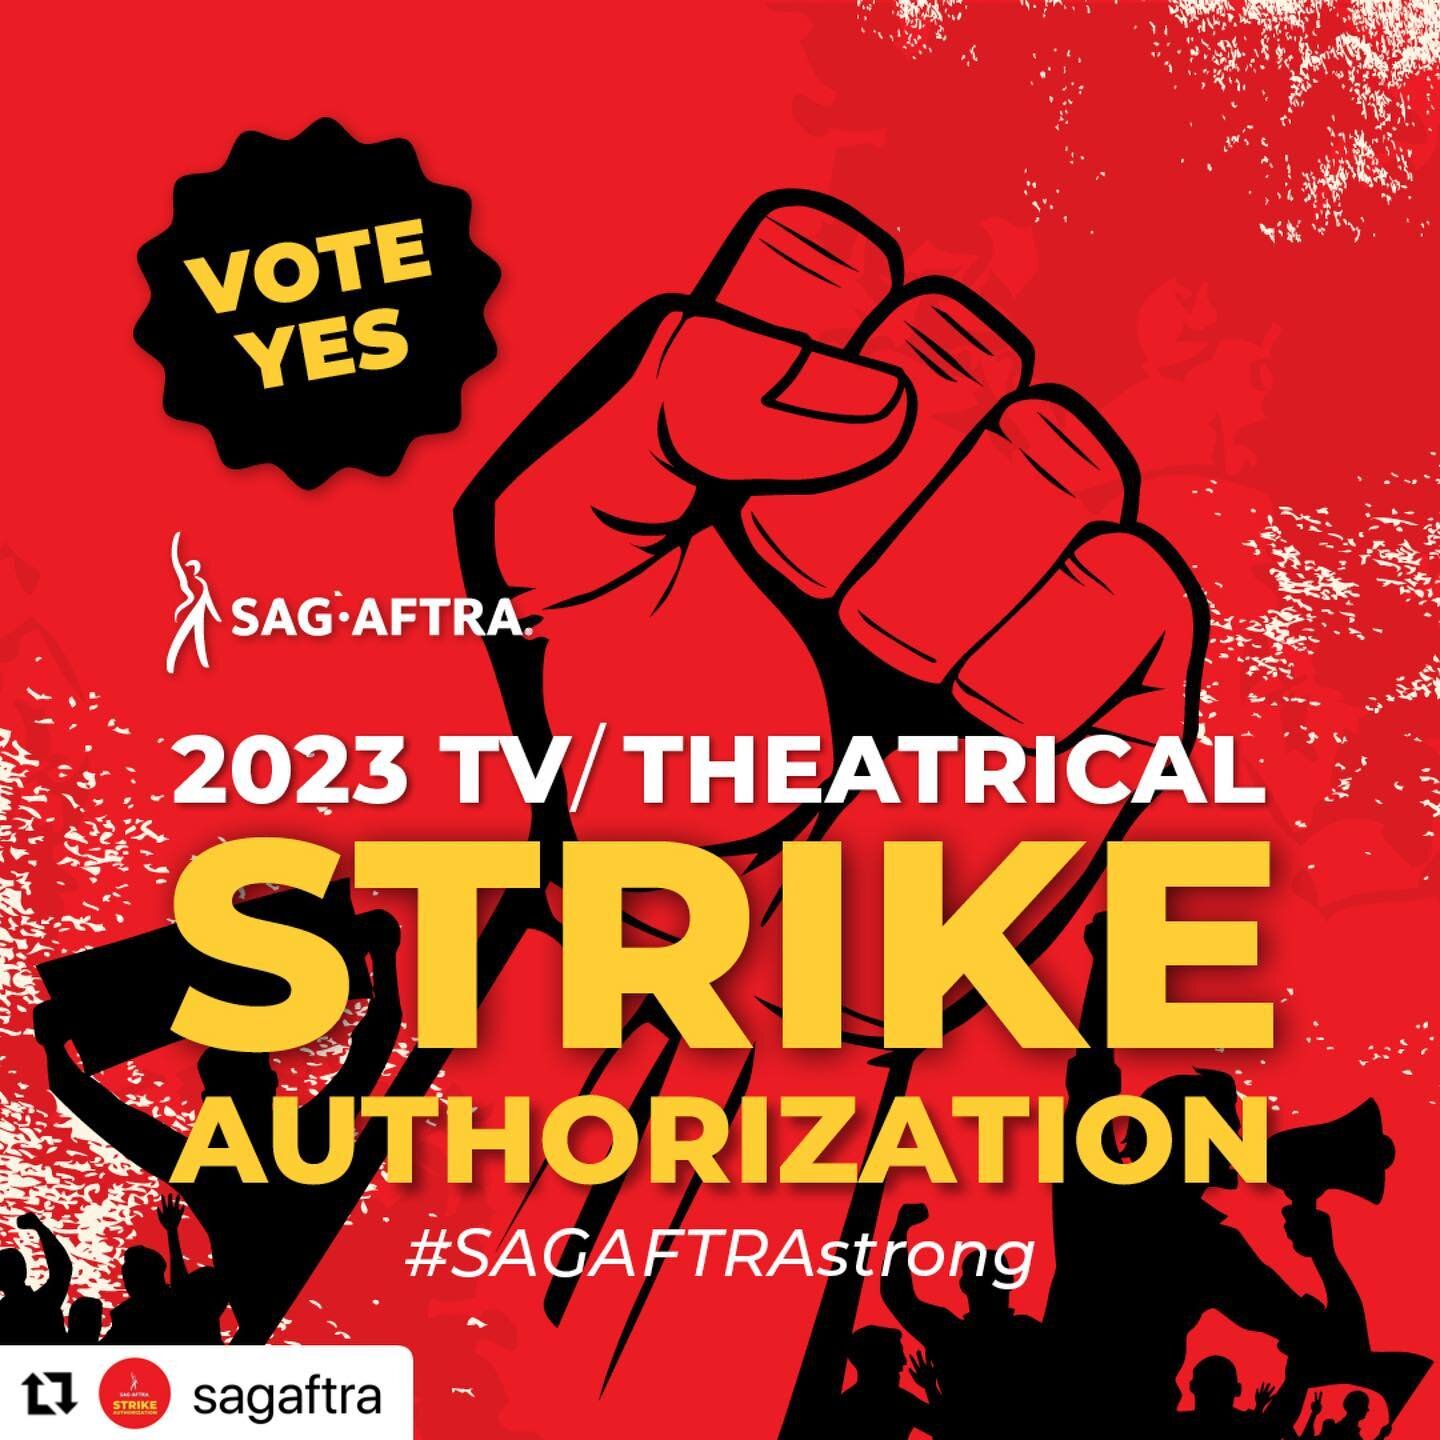 This is where we are. 
✊🏾✊🏾✊🏾
#solidarity #letsgo #wgastrong #sagaftrastrong #acther #actherstudios #sagaftra 

#Repost @sagaftra with @use.repost
・・・
SAG-AFTRA National Board Unanimously Agrees To Send Authorization Vote To Members.